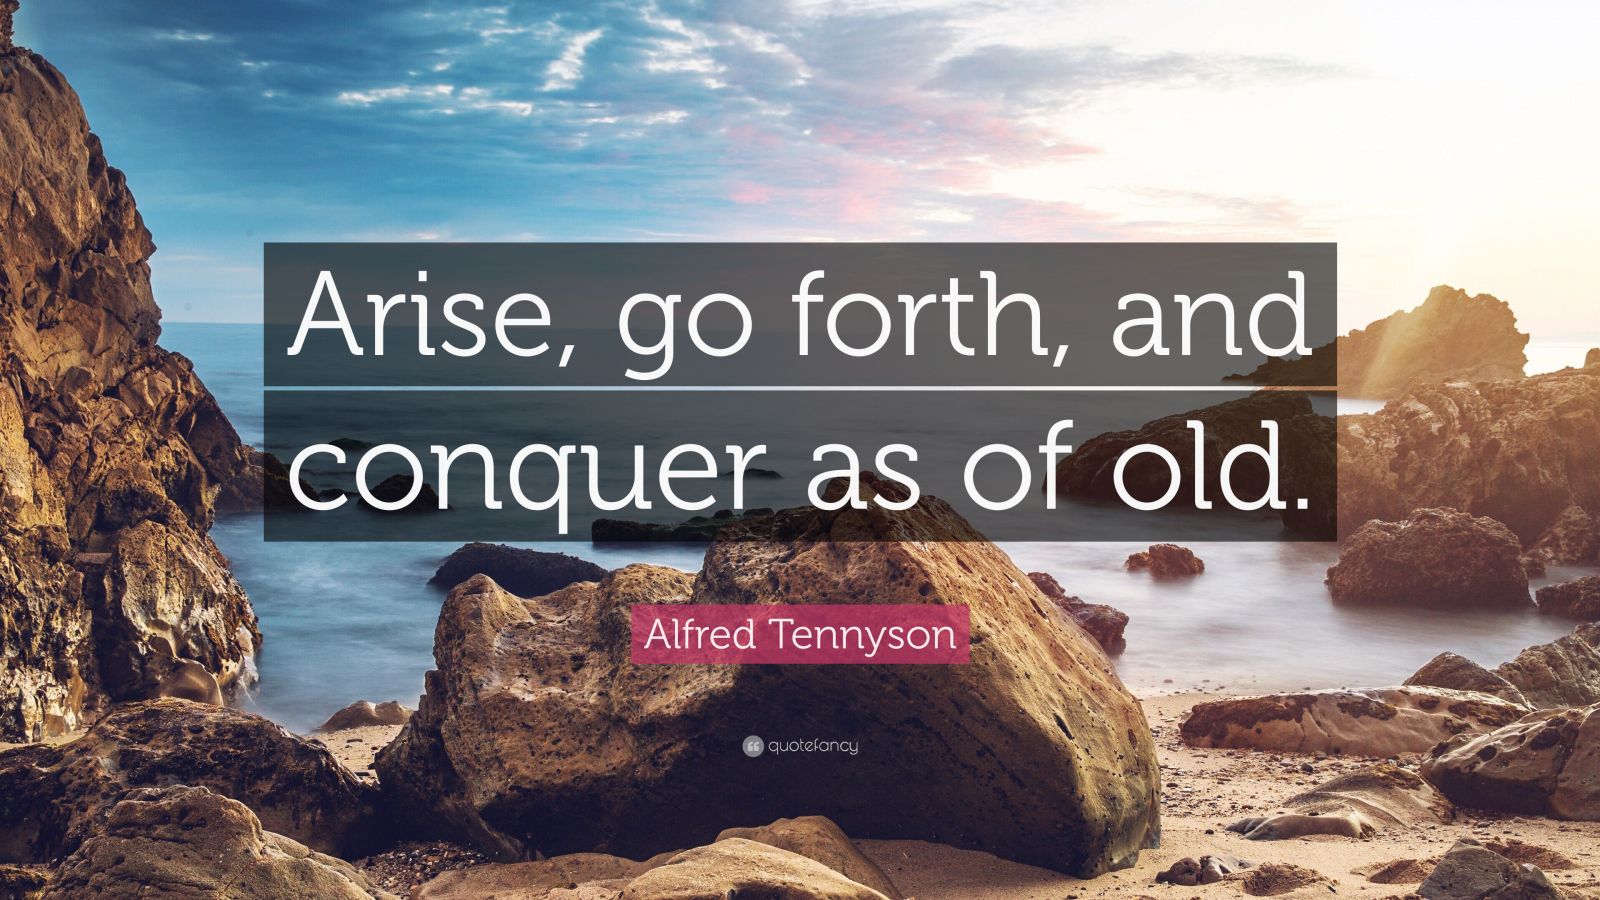 go forth and conquer quote